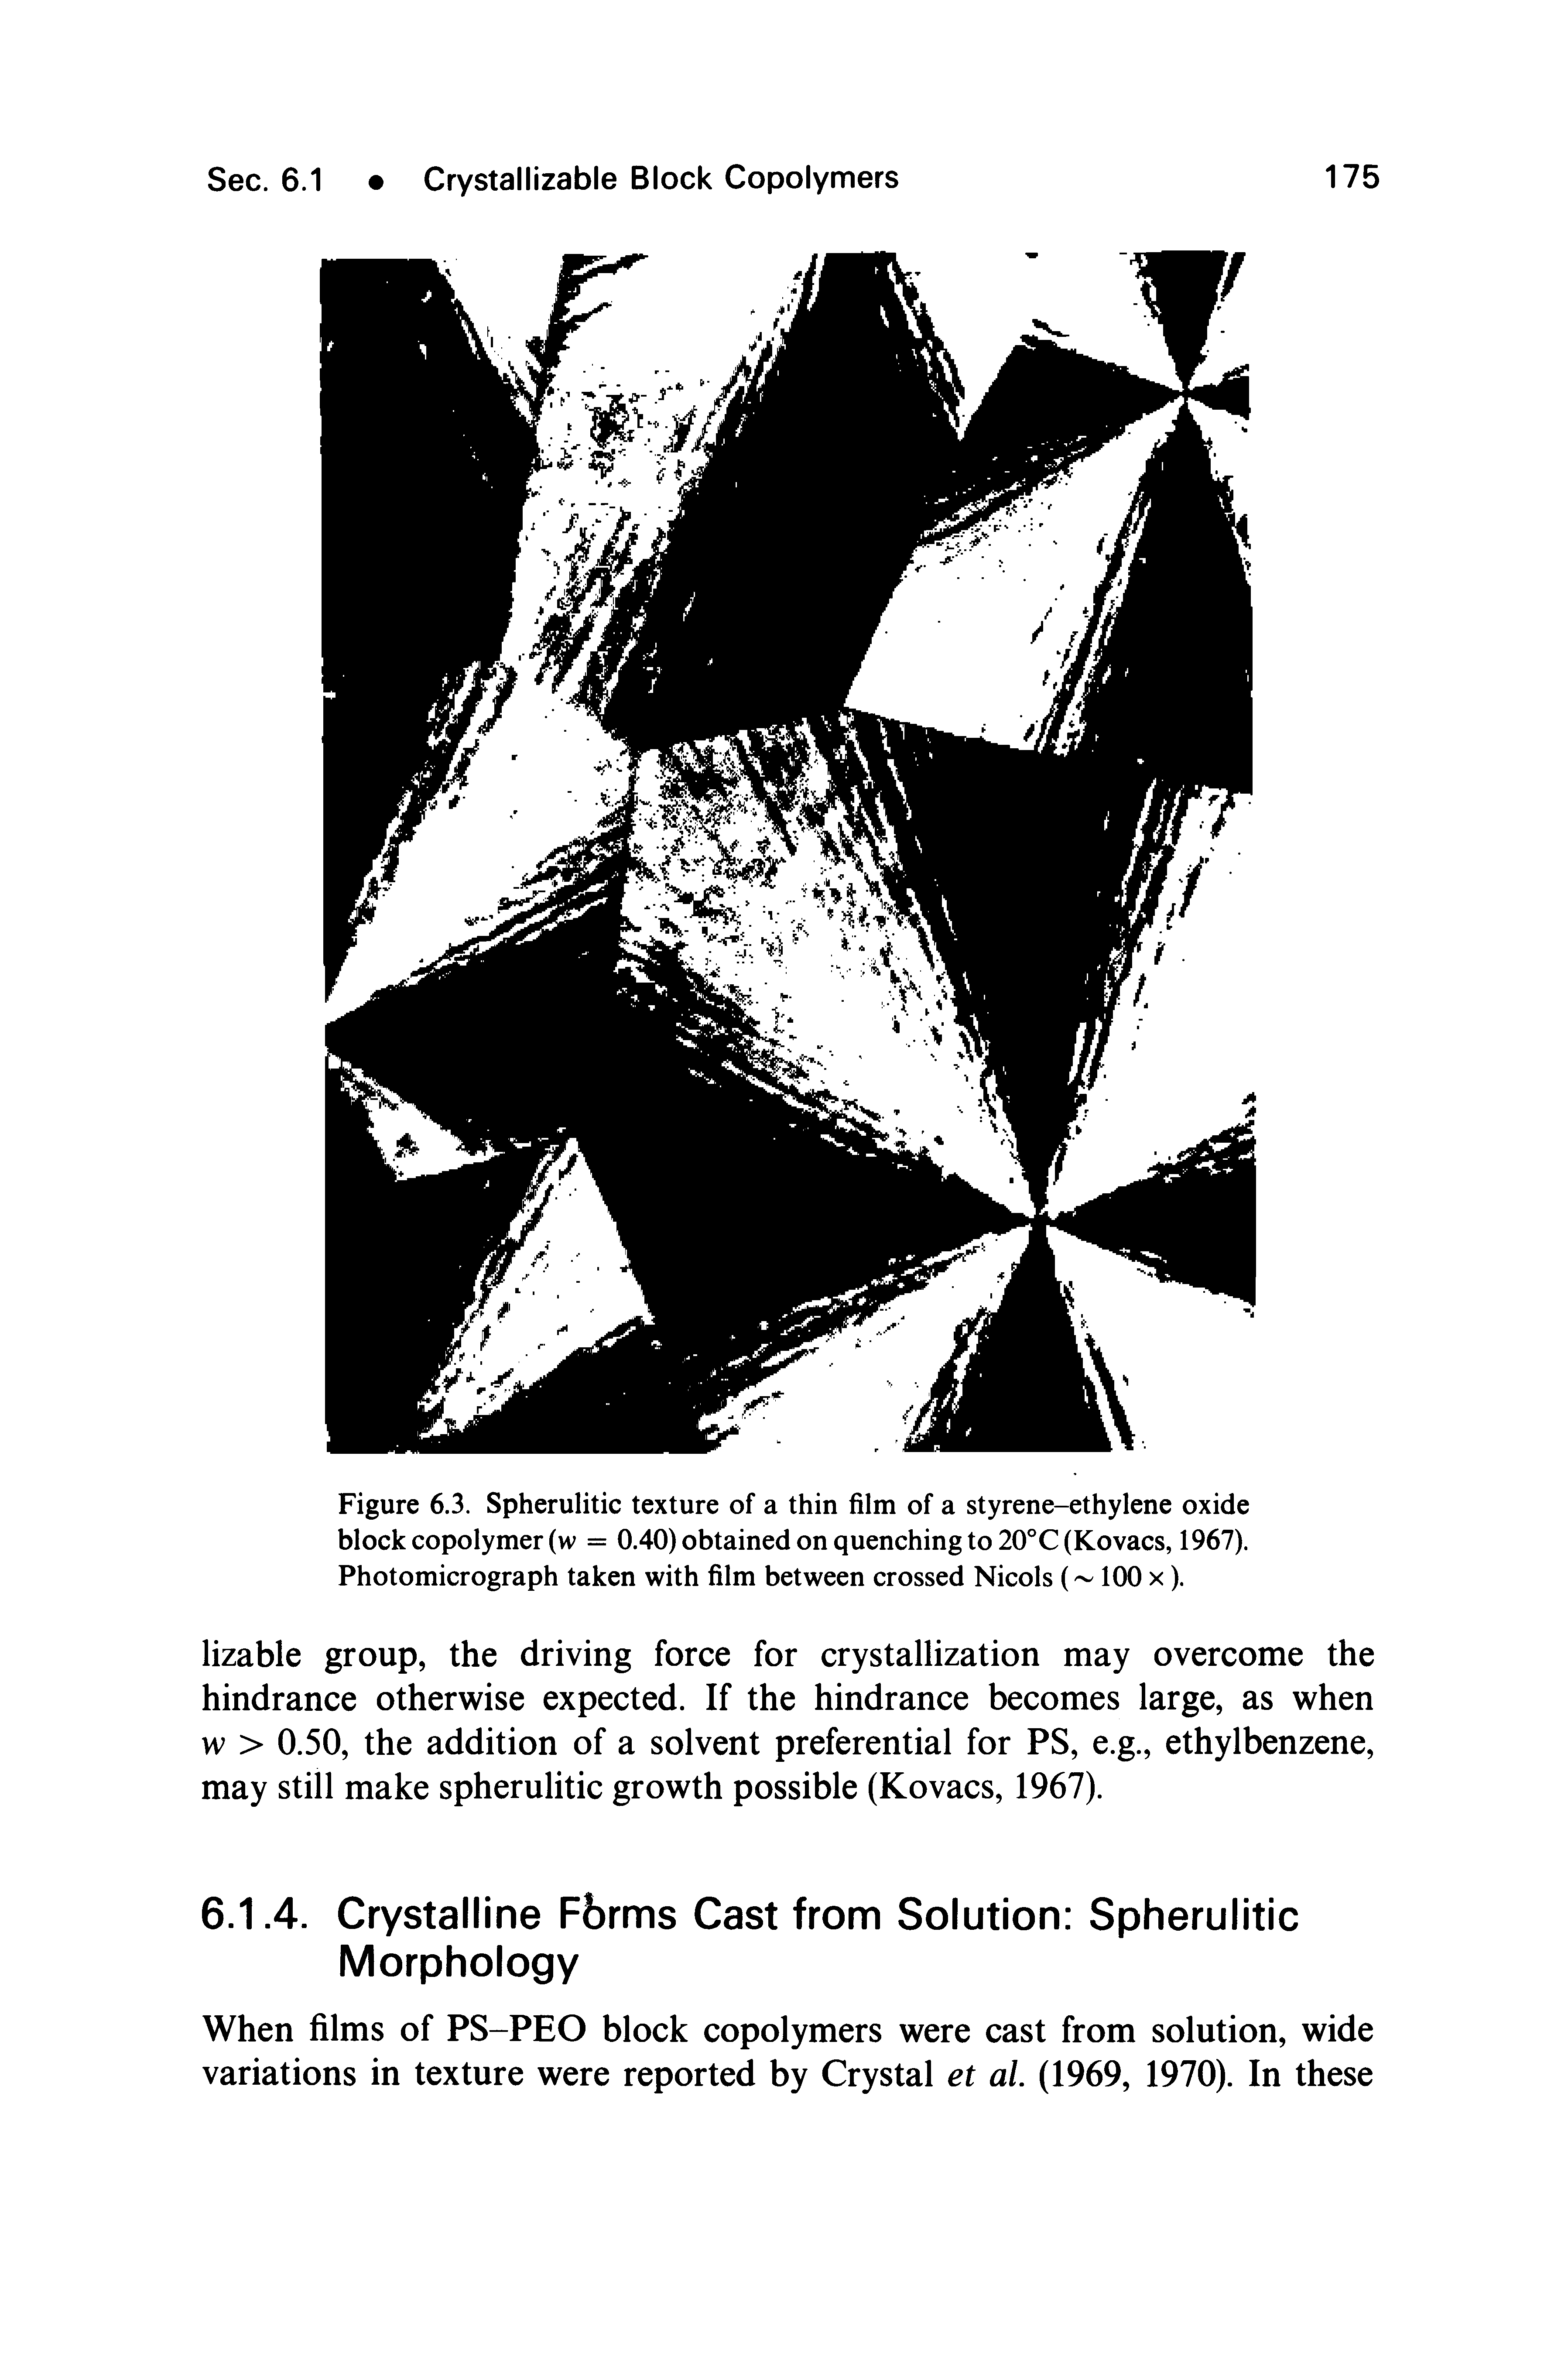 Figure 6.3. Spherulitic texture of a thin film of a styrene-ethylene oxide block copolymer (w = 0.40) obtained on quenching to 20°C (Kovacs, 1967). Photomicrograph taken with film between crossed Nicols ( 100 x).